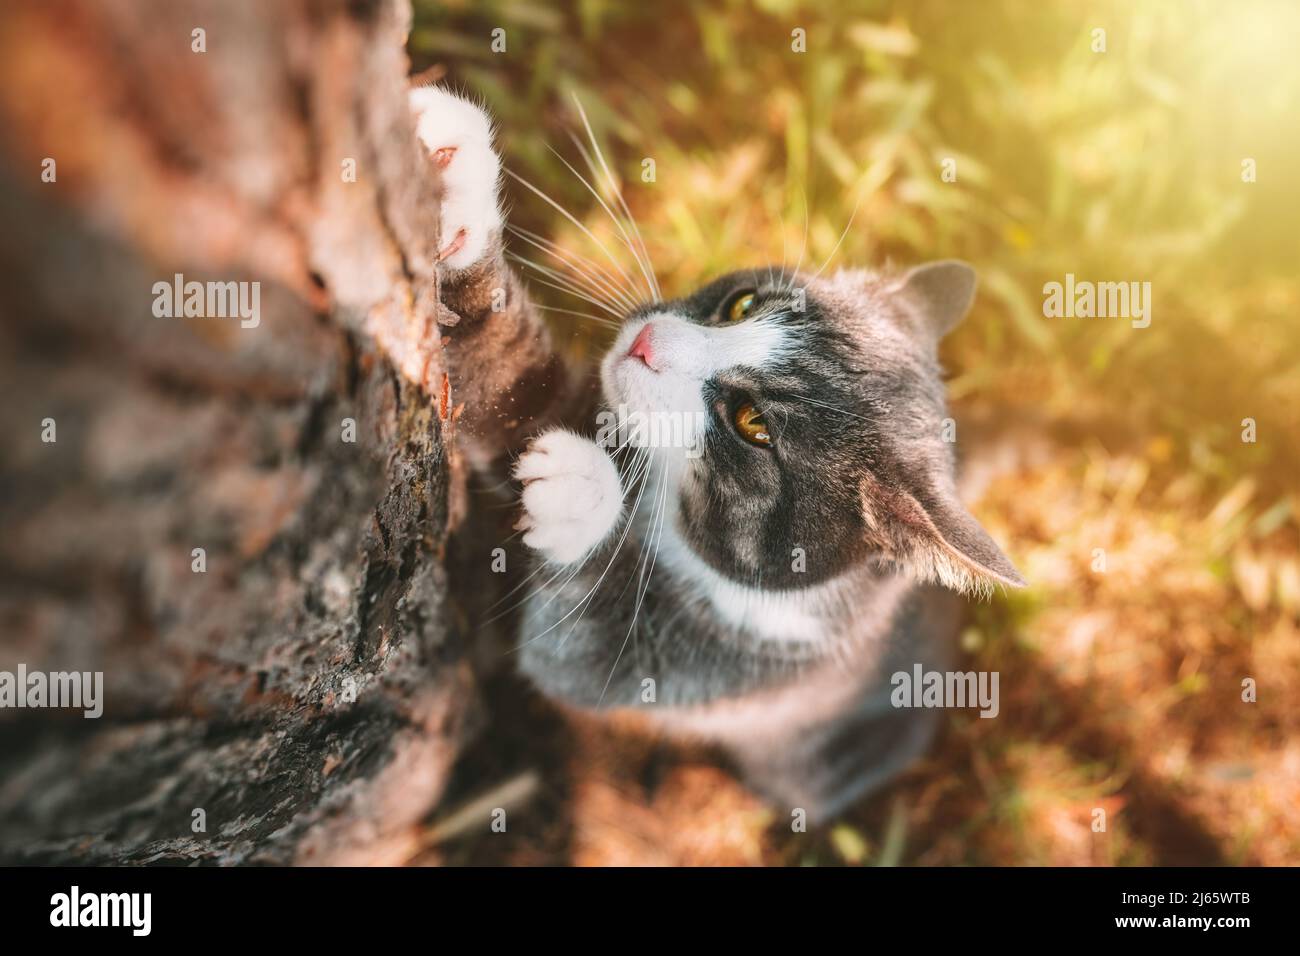 Cat scratching tree outdoors. Cat sharpens its claws on a tree trunk in nature. Stock Photo